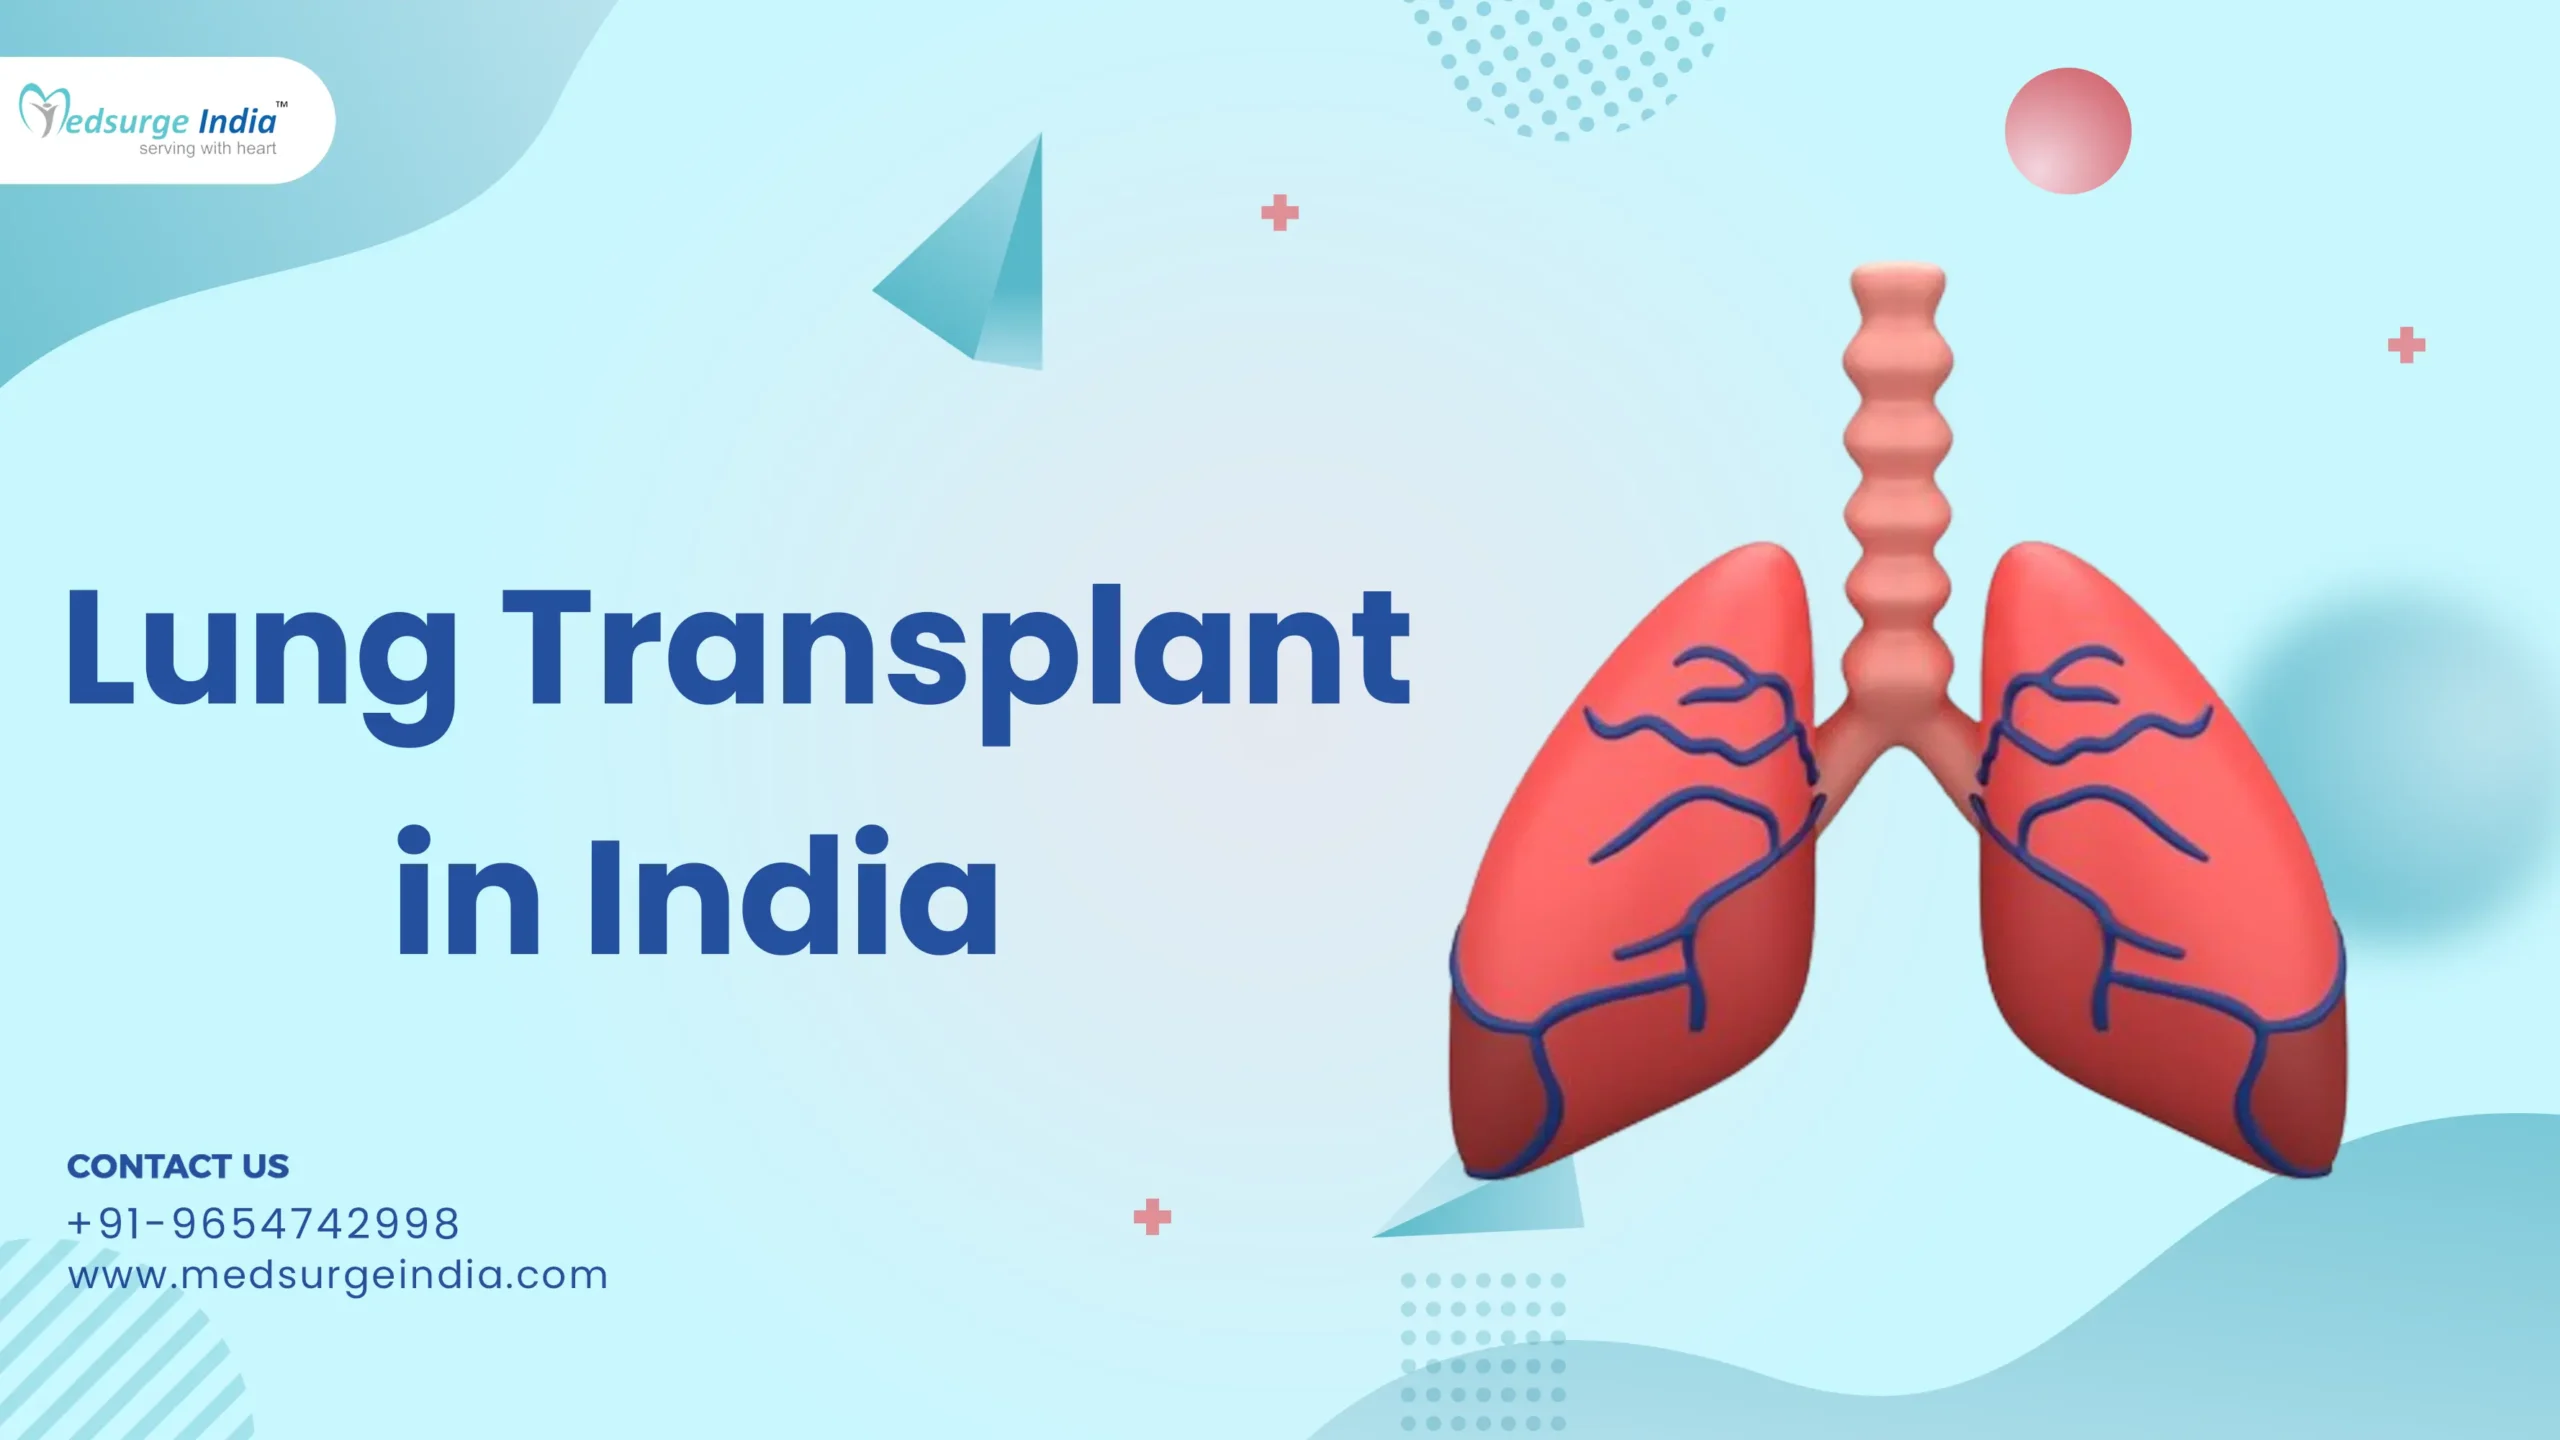 Lung Transplant in India